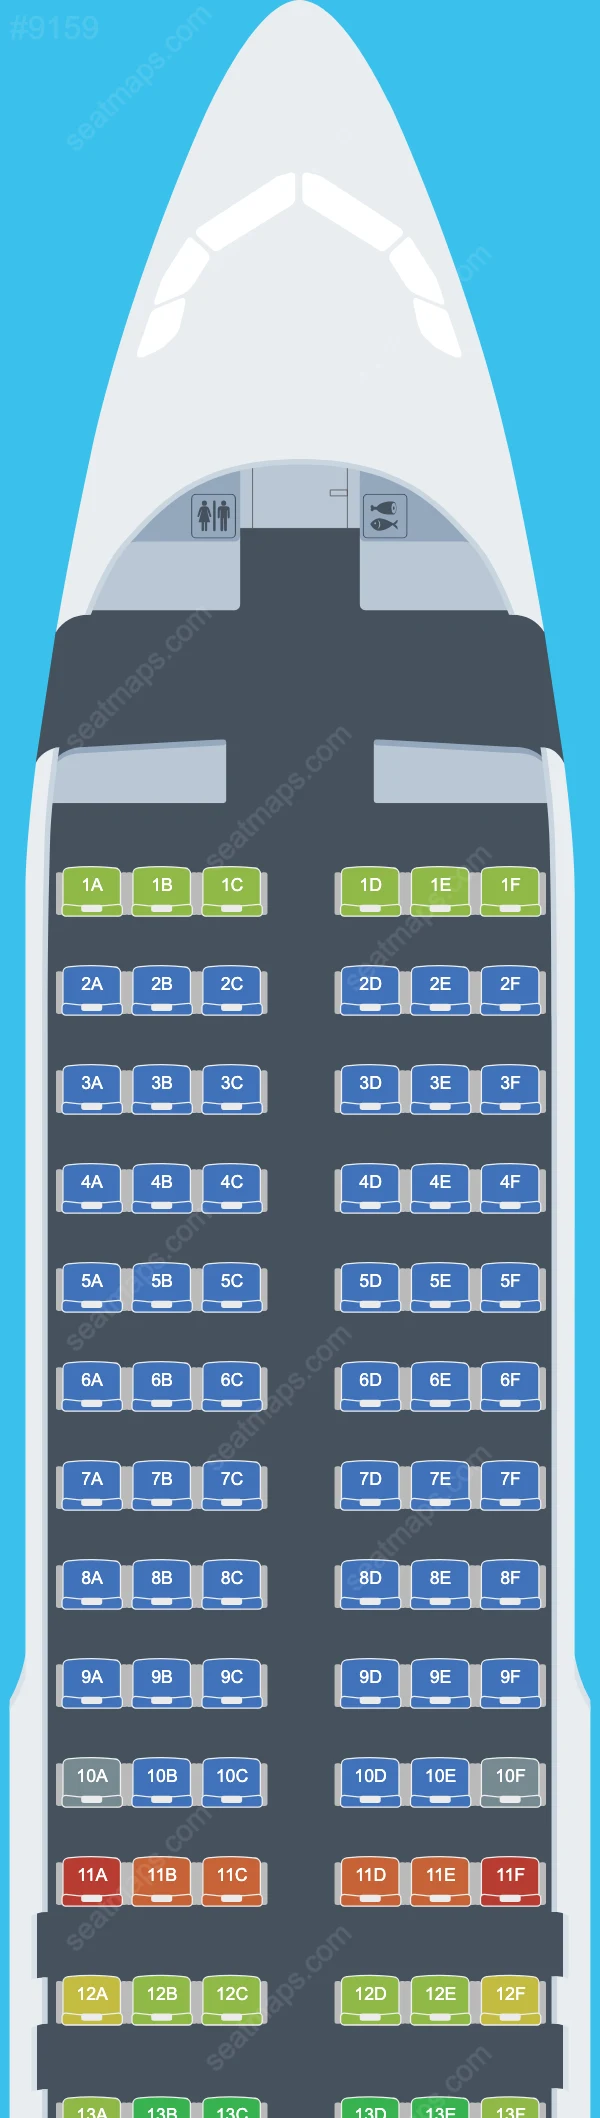 Lanmei Airlines Airbus A320 aircraft seat map  A320-200